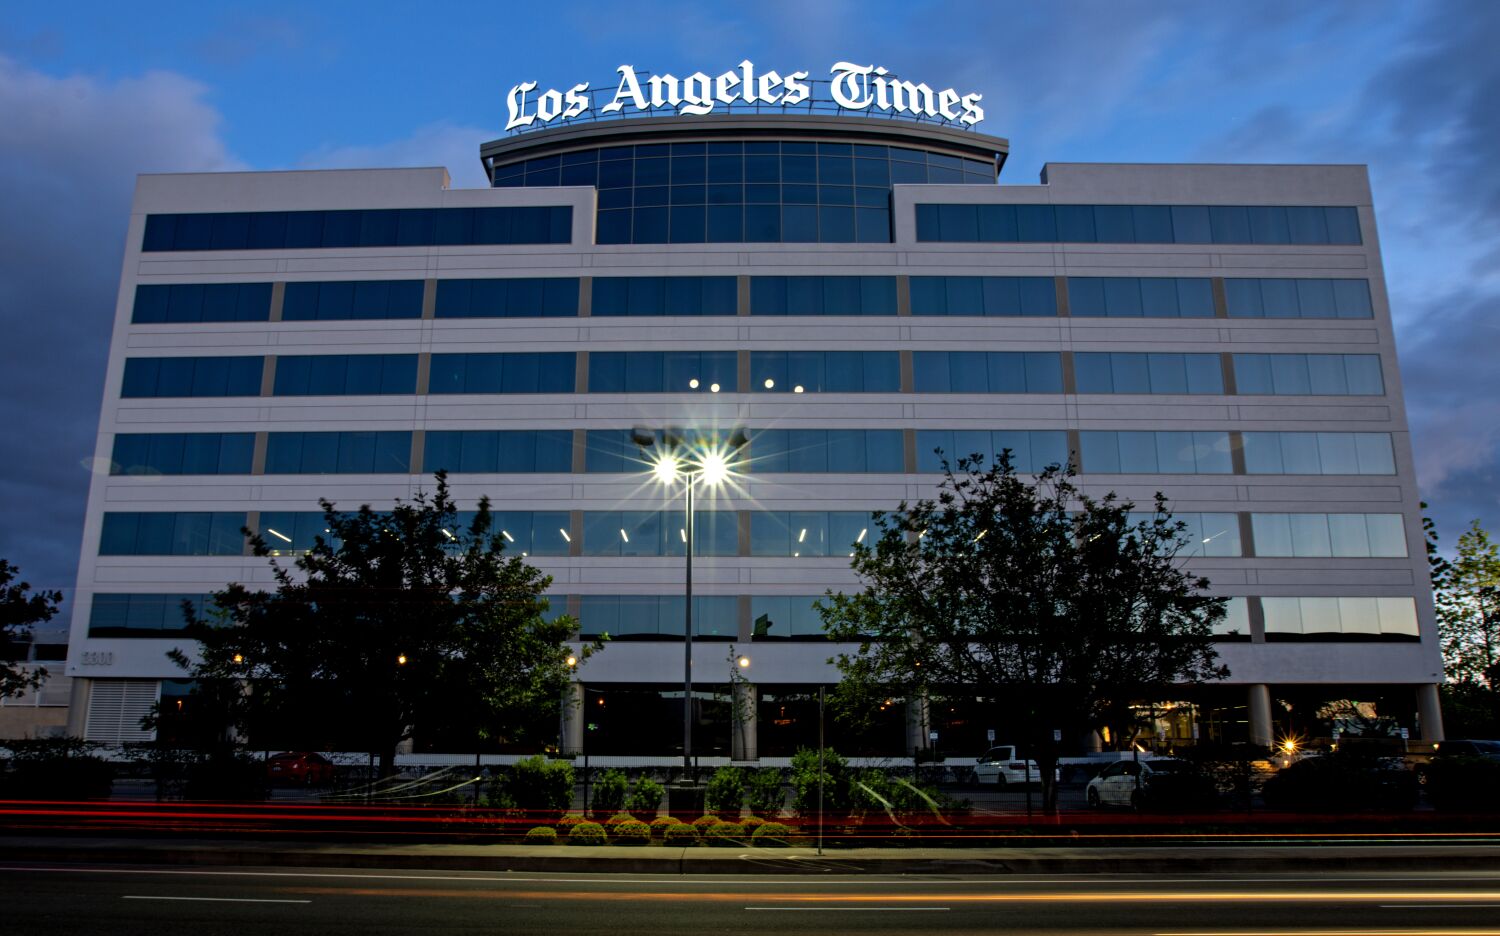 Los Angeles Times wins Pulitzer Prizes for covering homelessness and City Council leak